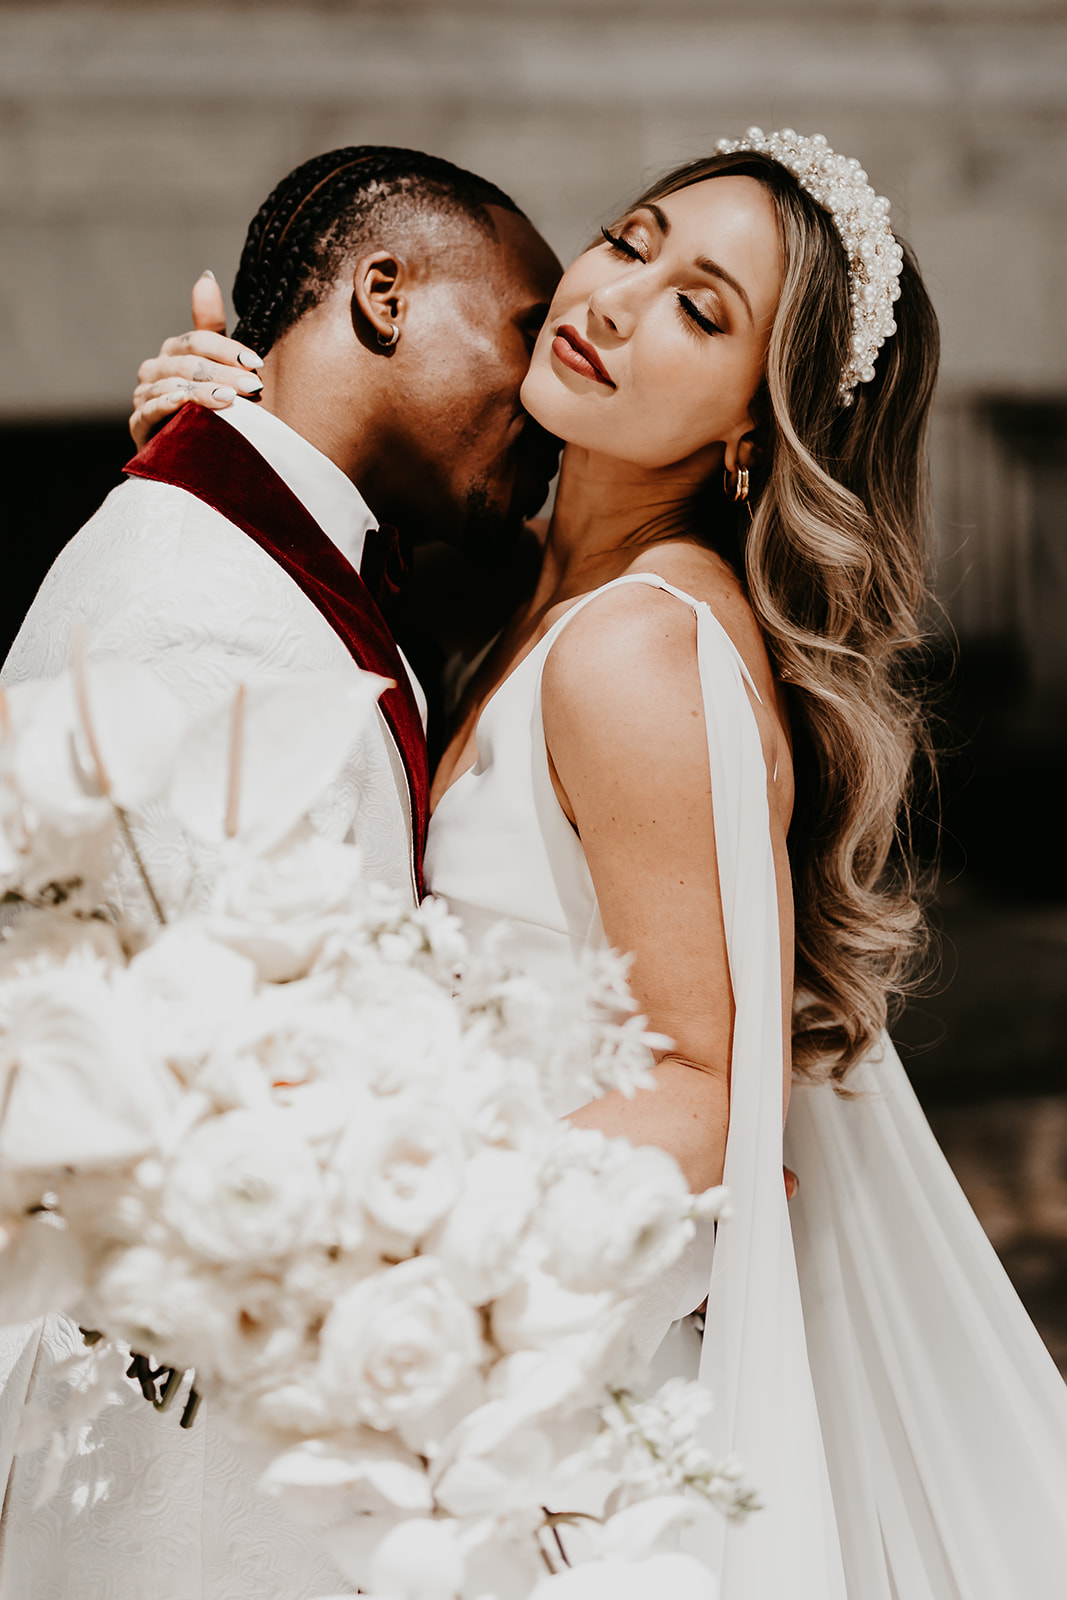 Elegant wedding portrait in the heart of downtown Cleveland - showcasing the couple's sophisticated and trendy vibe.